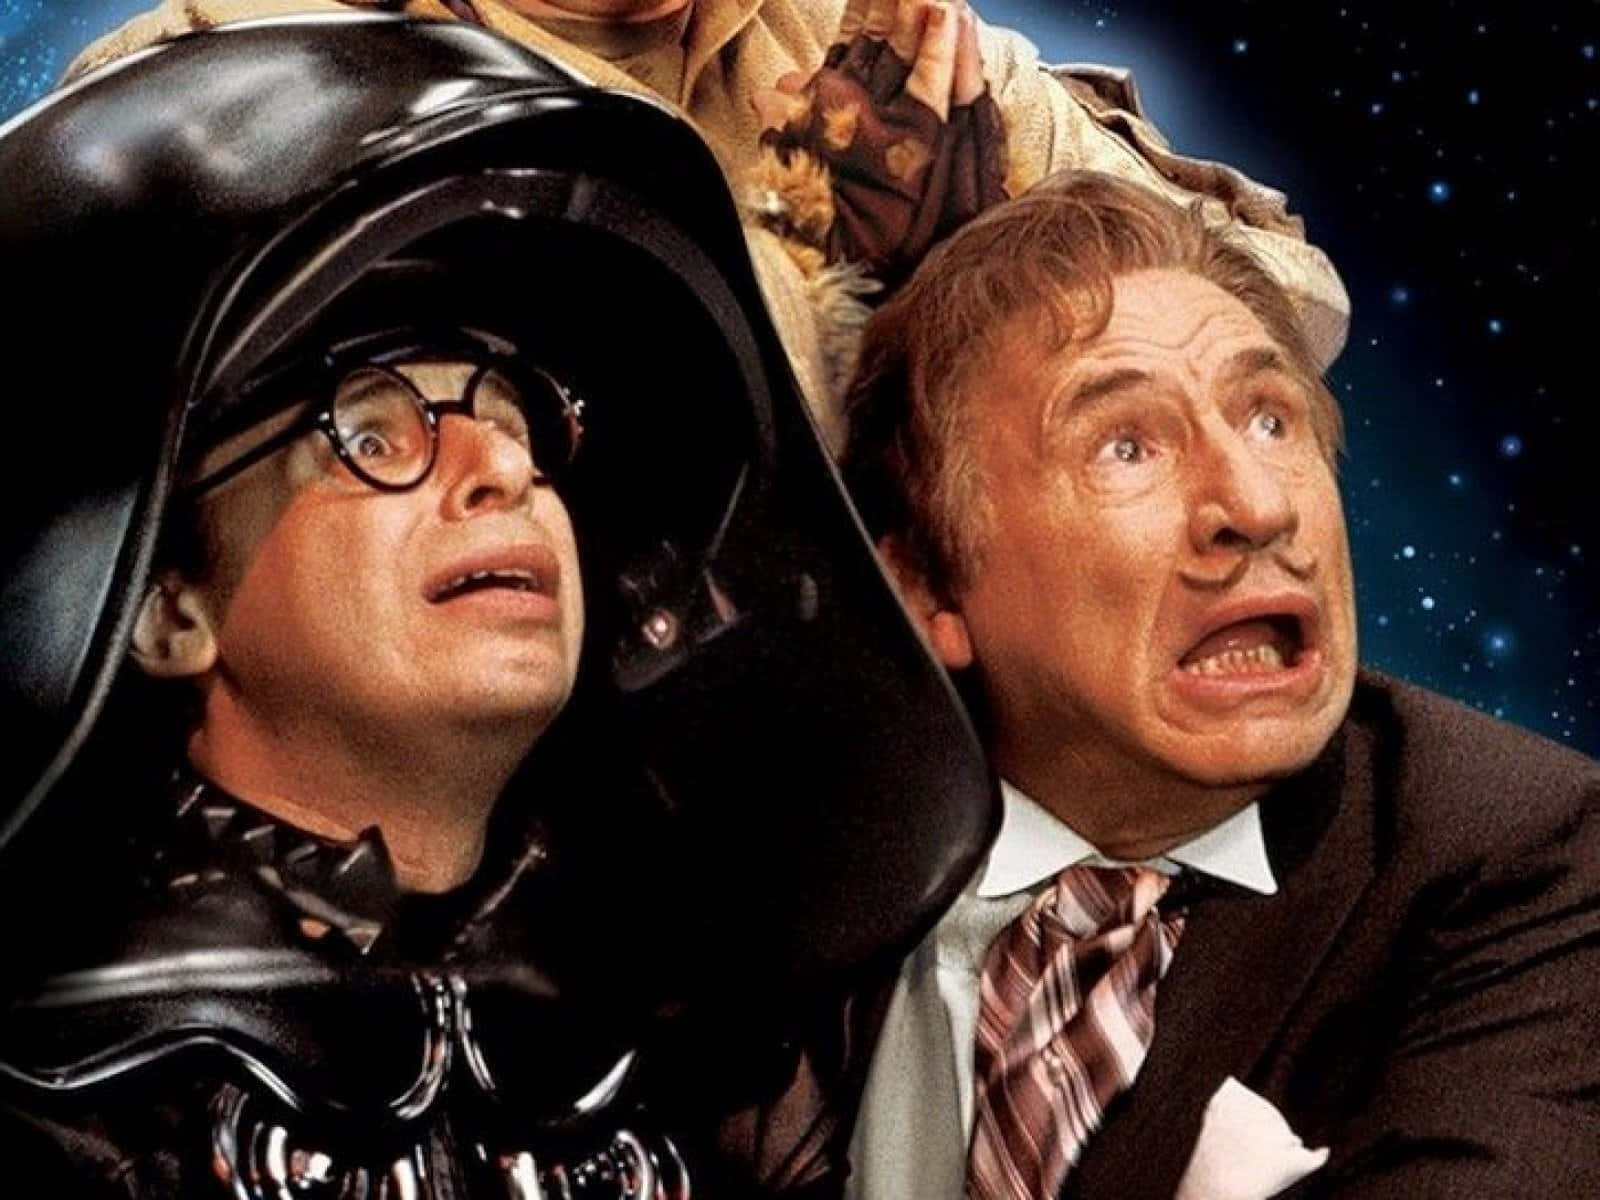 The heroes of Spaceballs, ready for their next adventure. Wallpaper